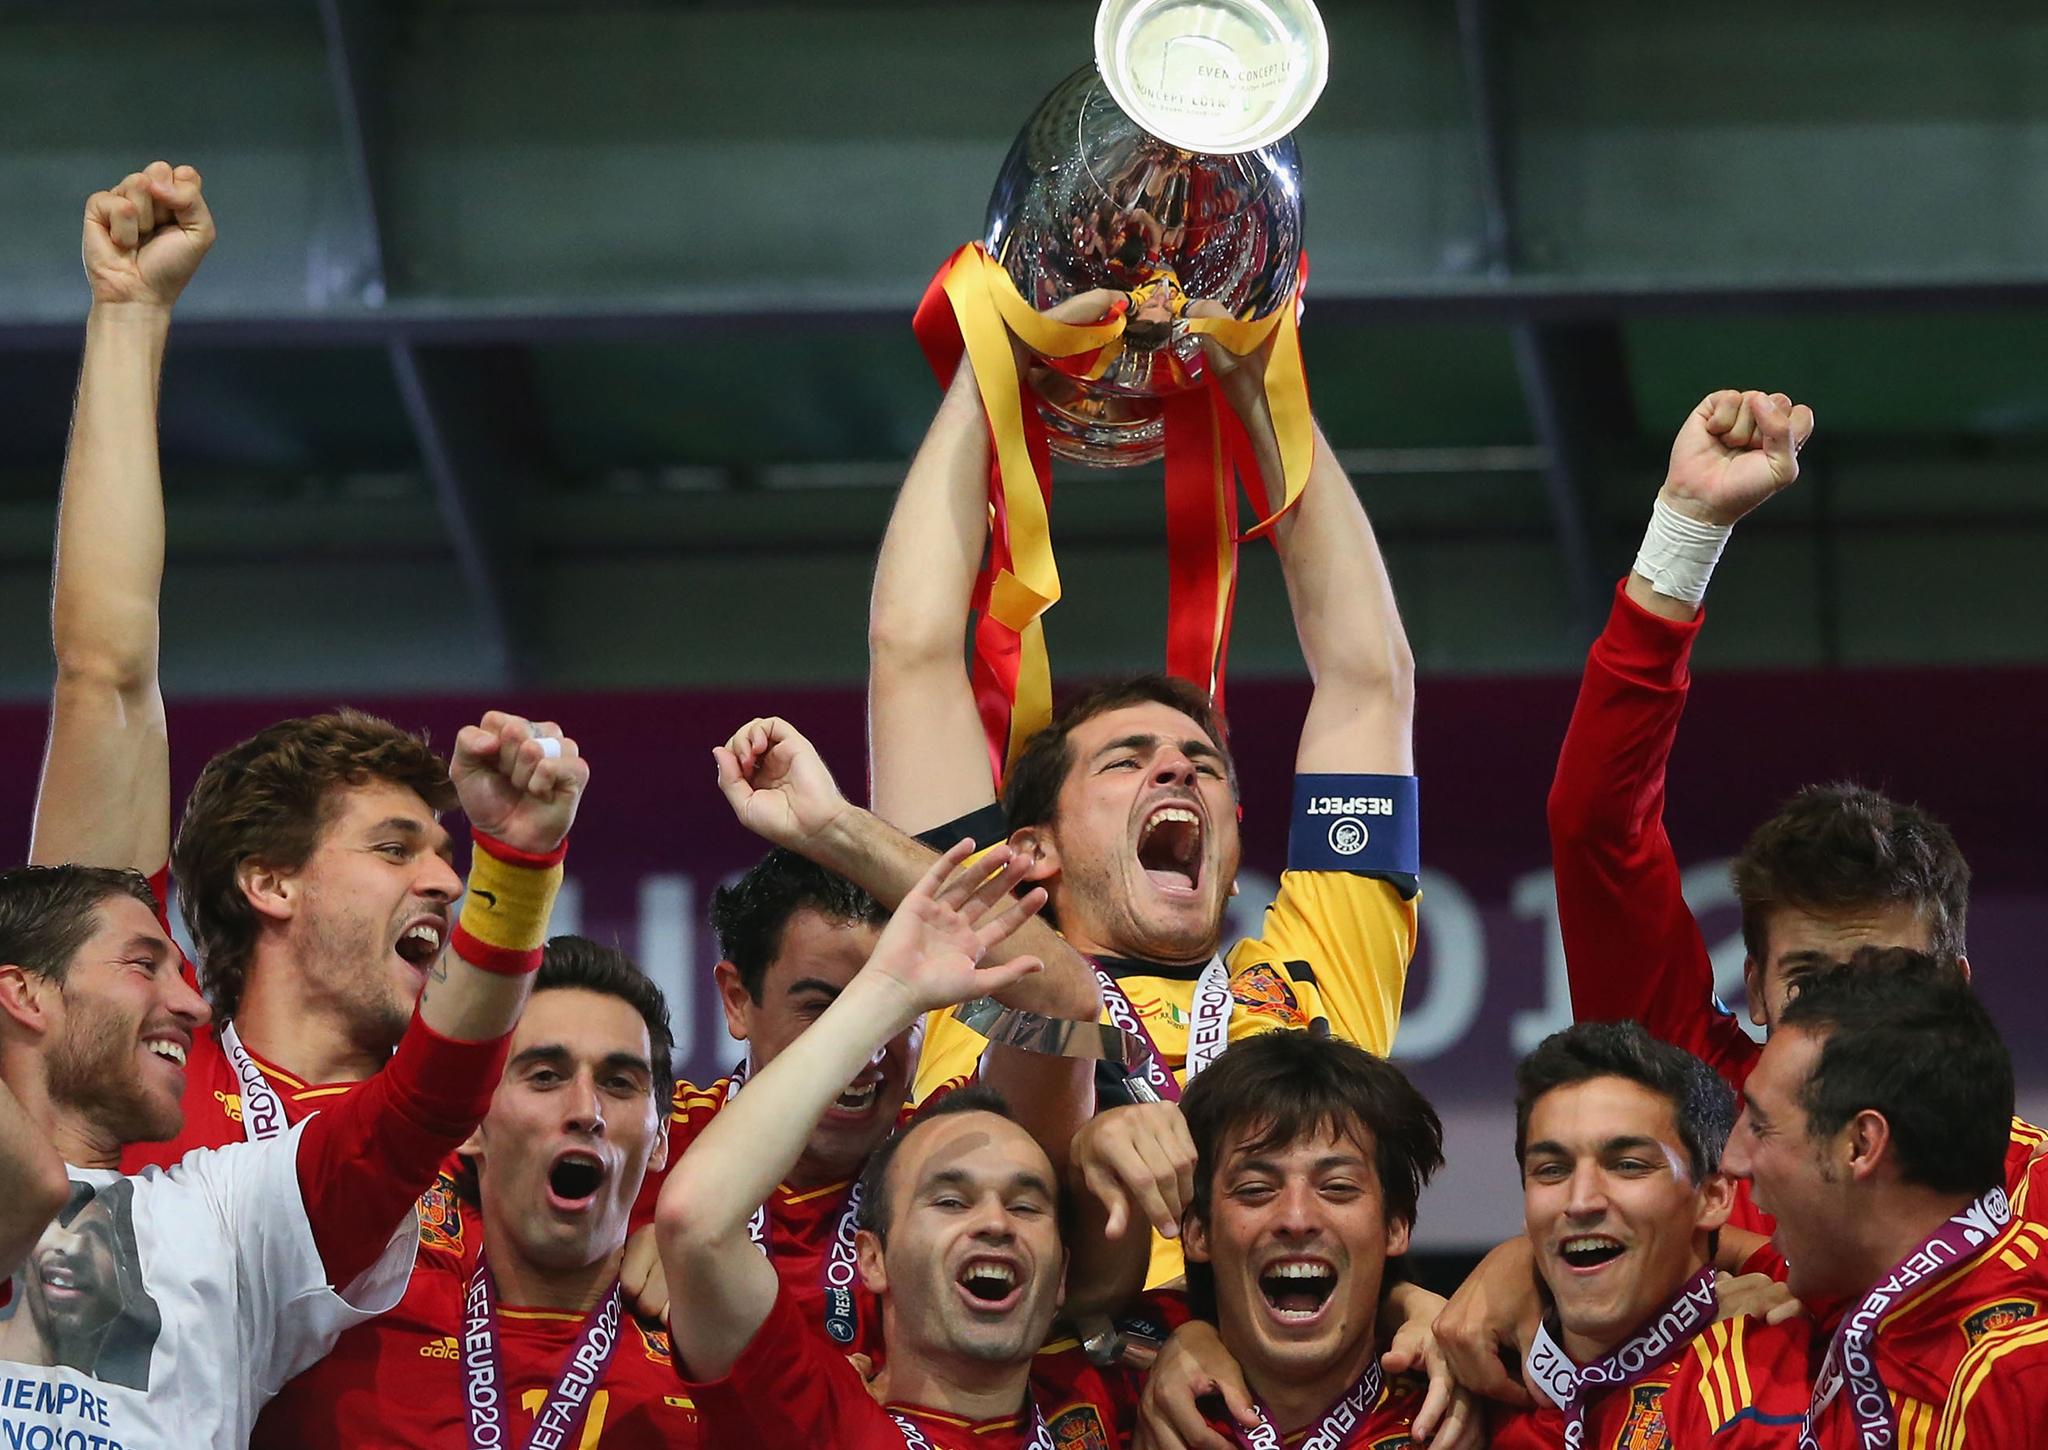 Spanish captain Iker Casillas lifts the trophy after victory during the UEFA EURO 2012 final match between Spain and Italy at the Olympic Stadium on July 1, 2012 in Kiev, Ukraine.